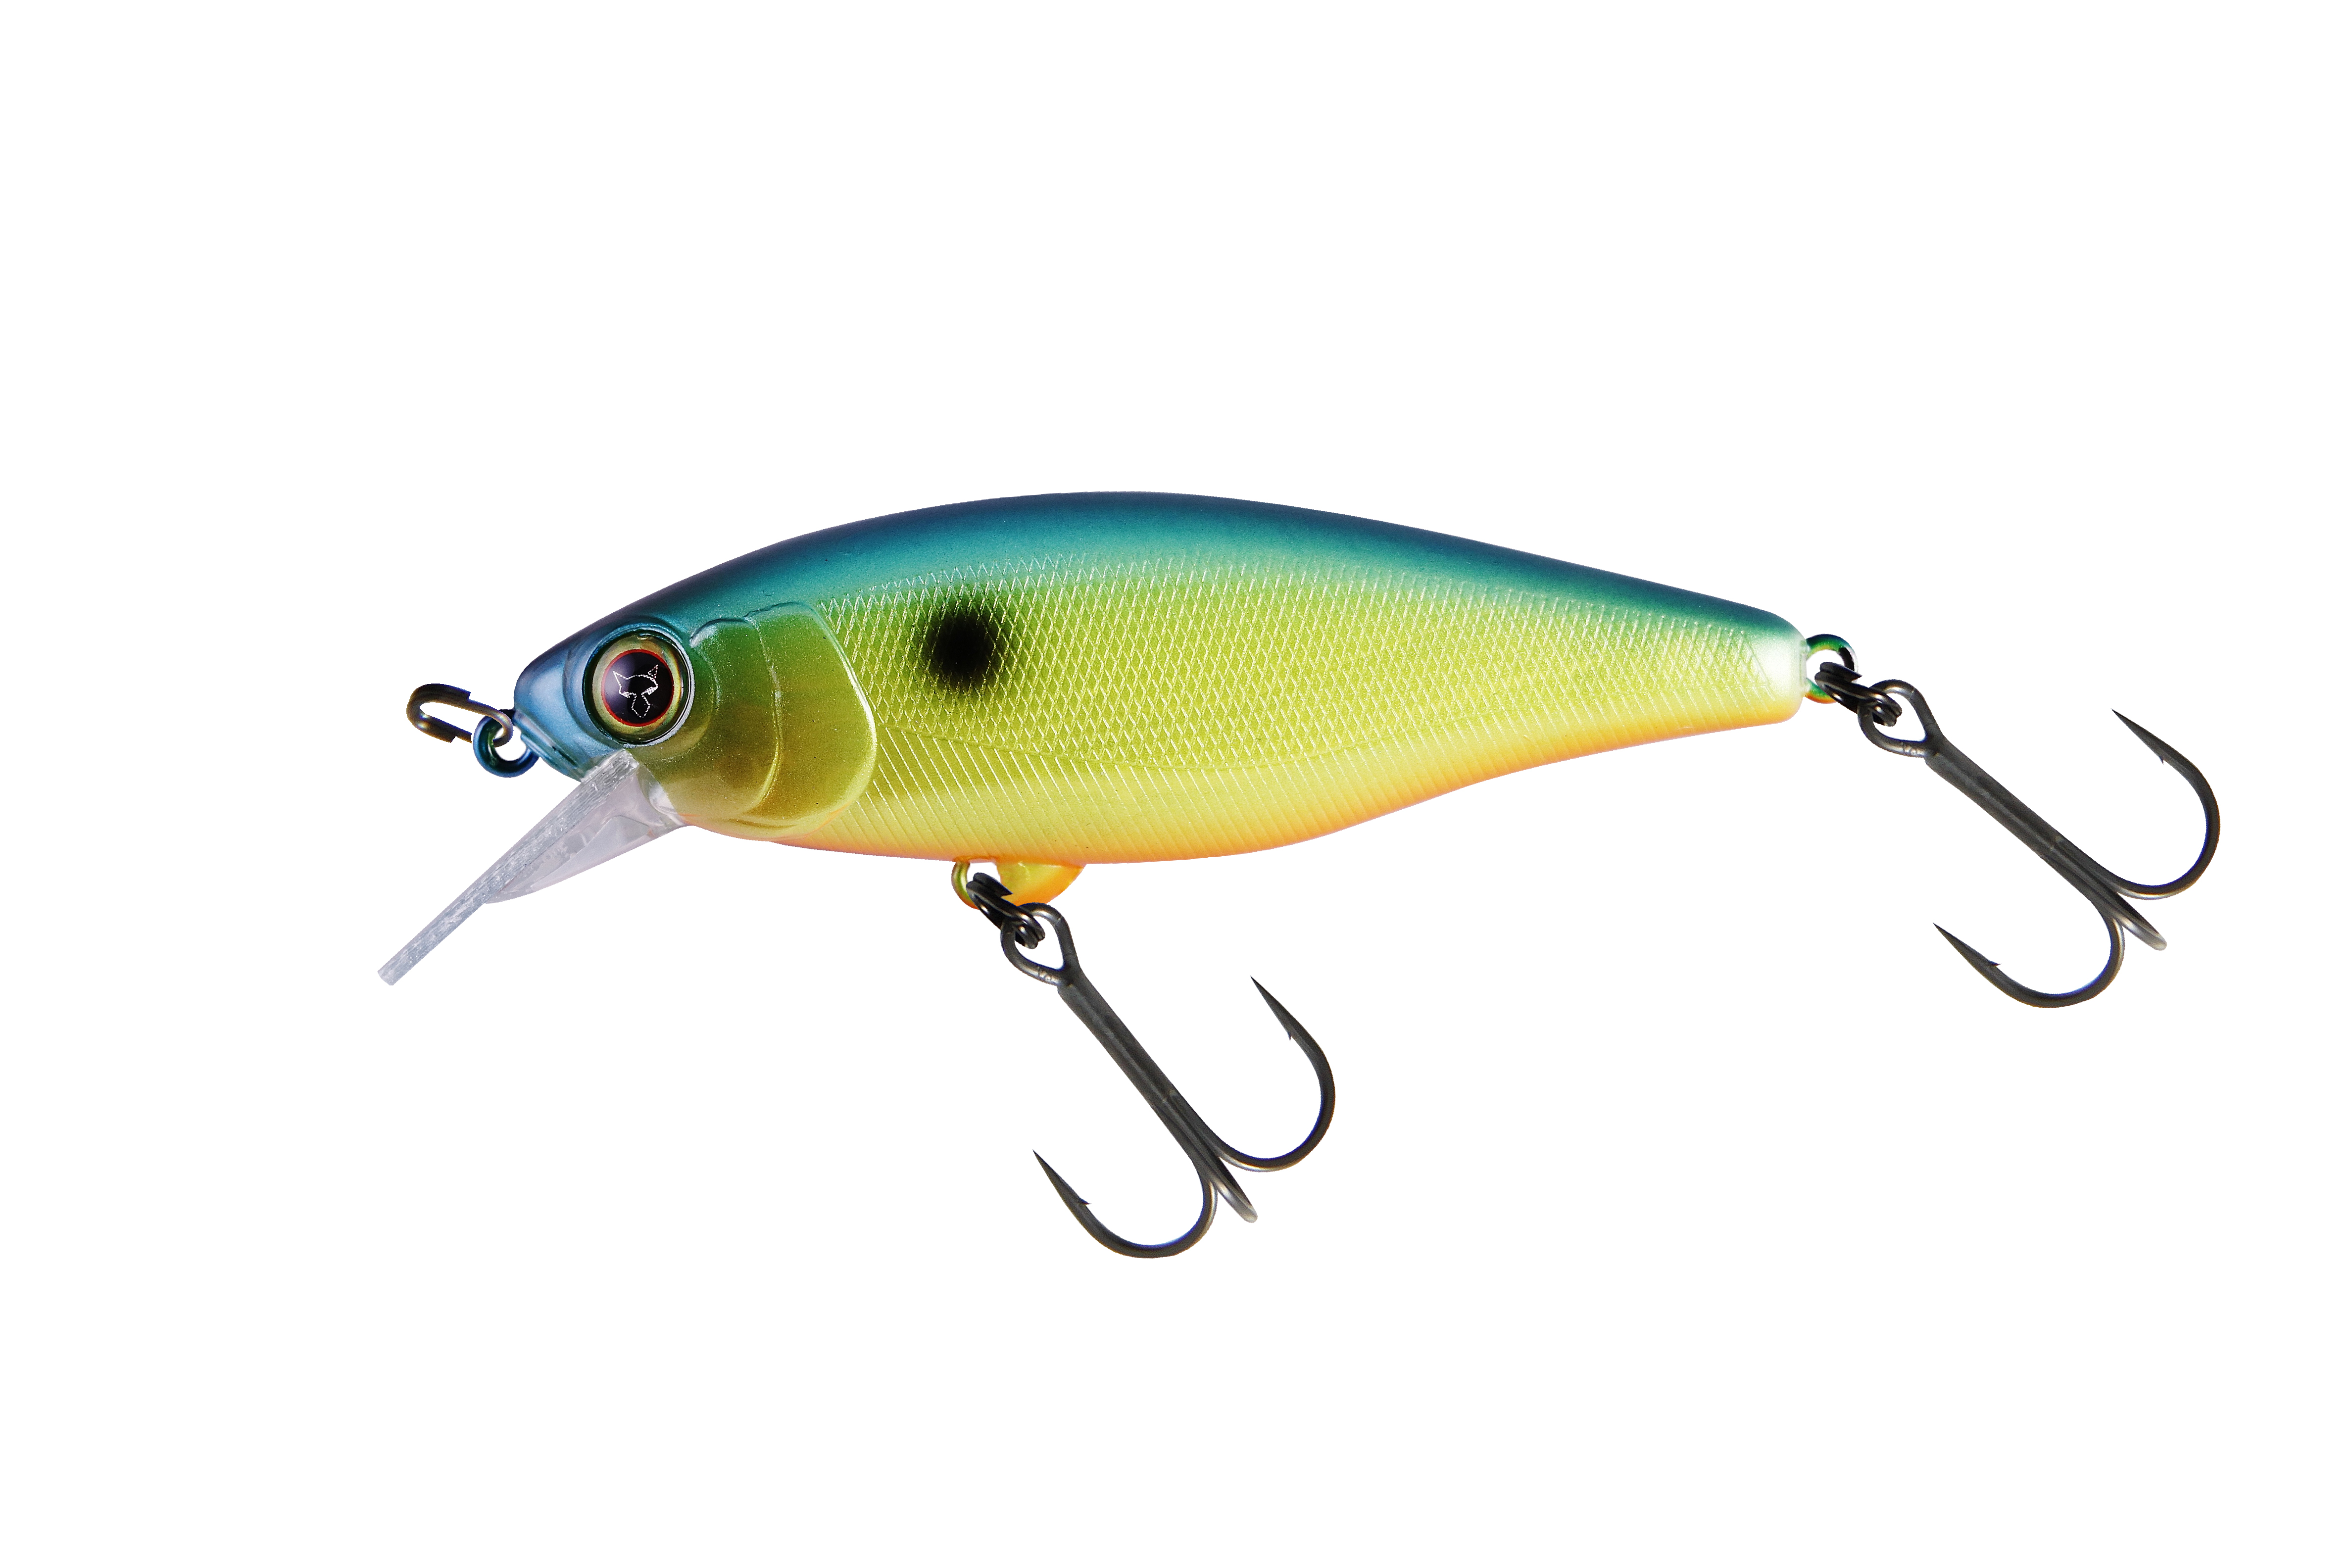 New Jackall Lures Introduced, ICAST 2018 Lures Now Available